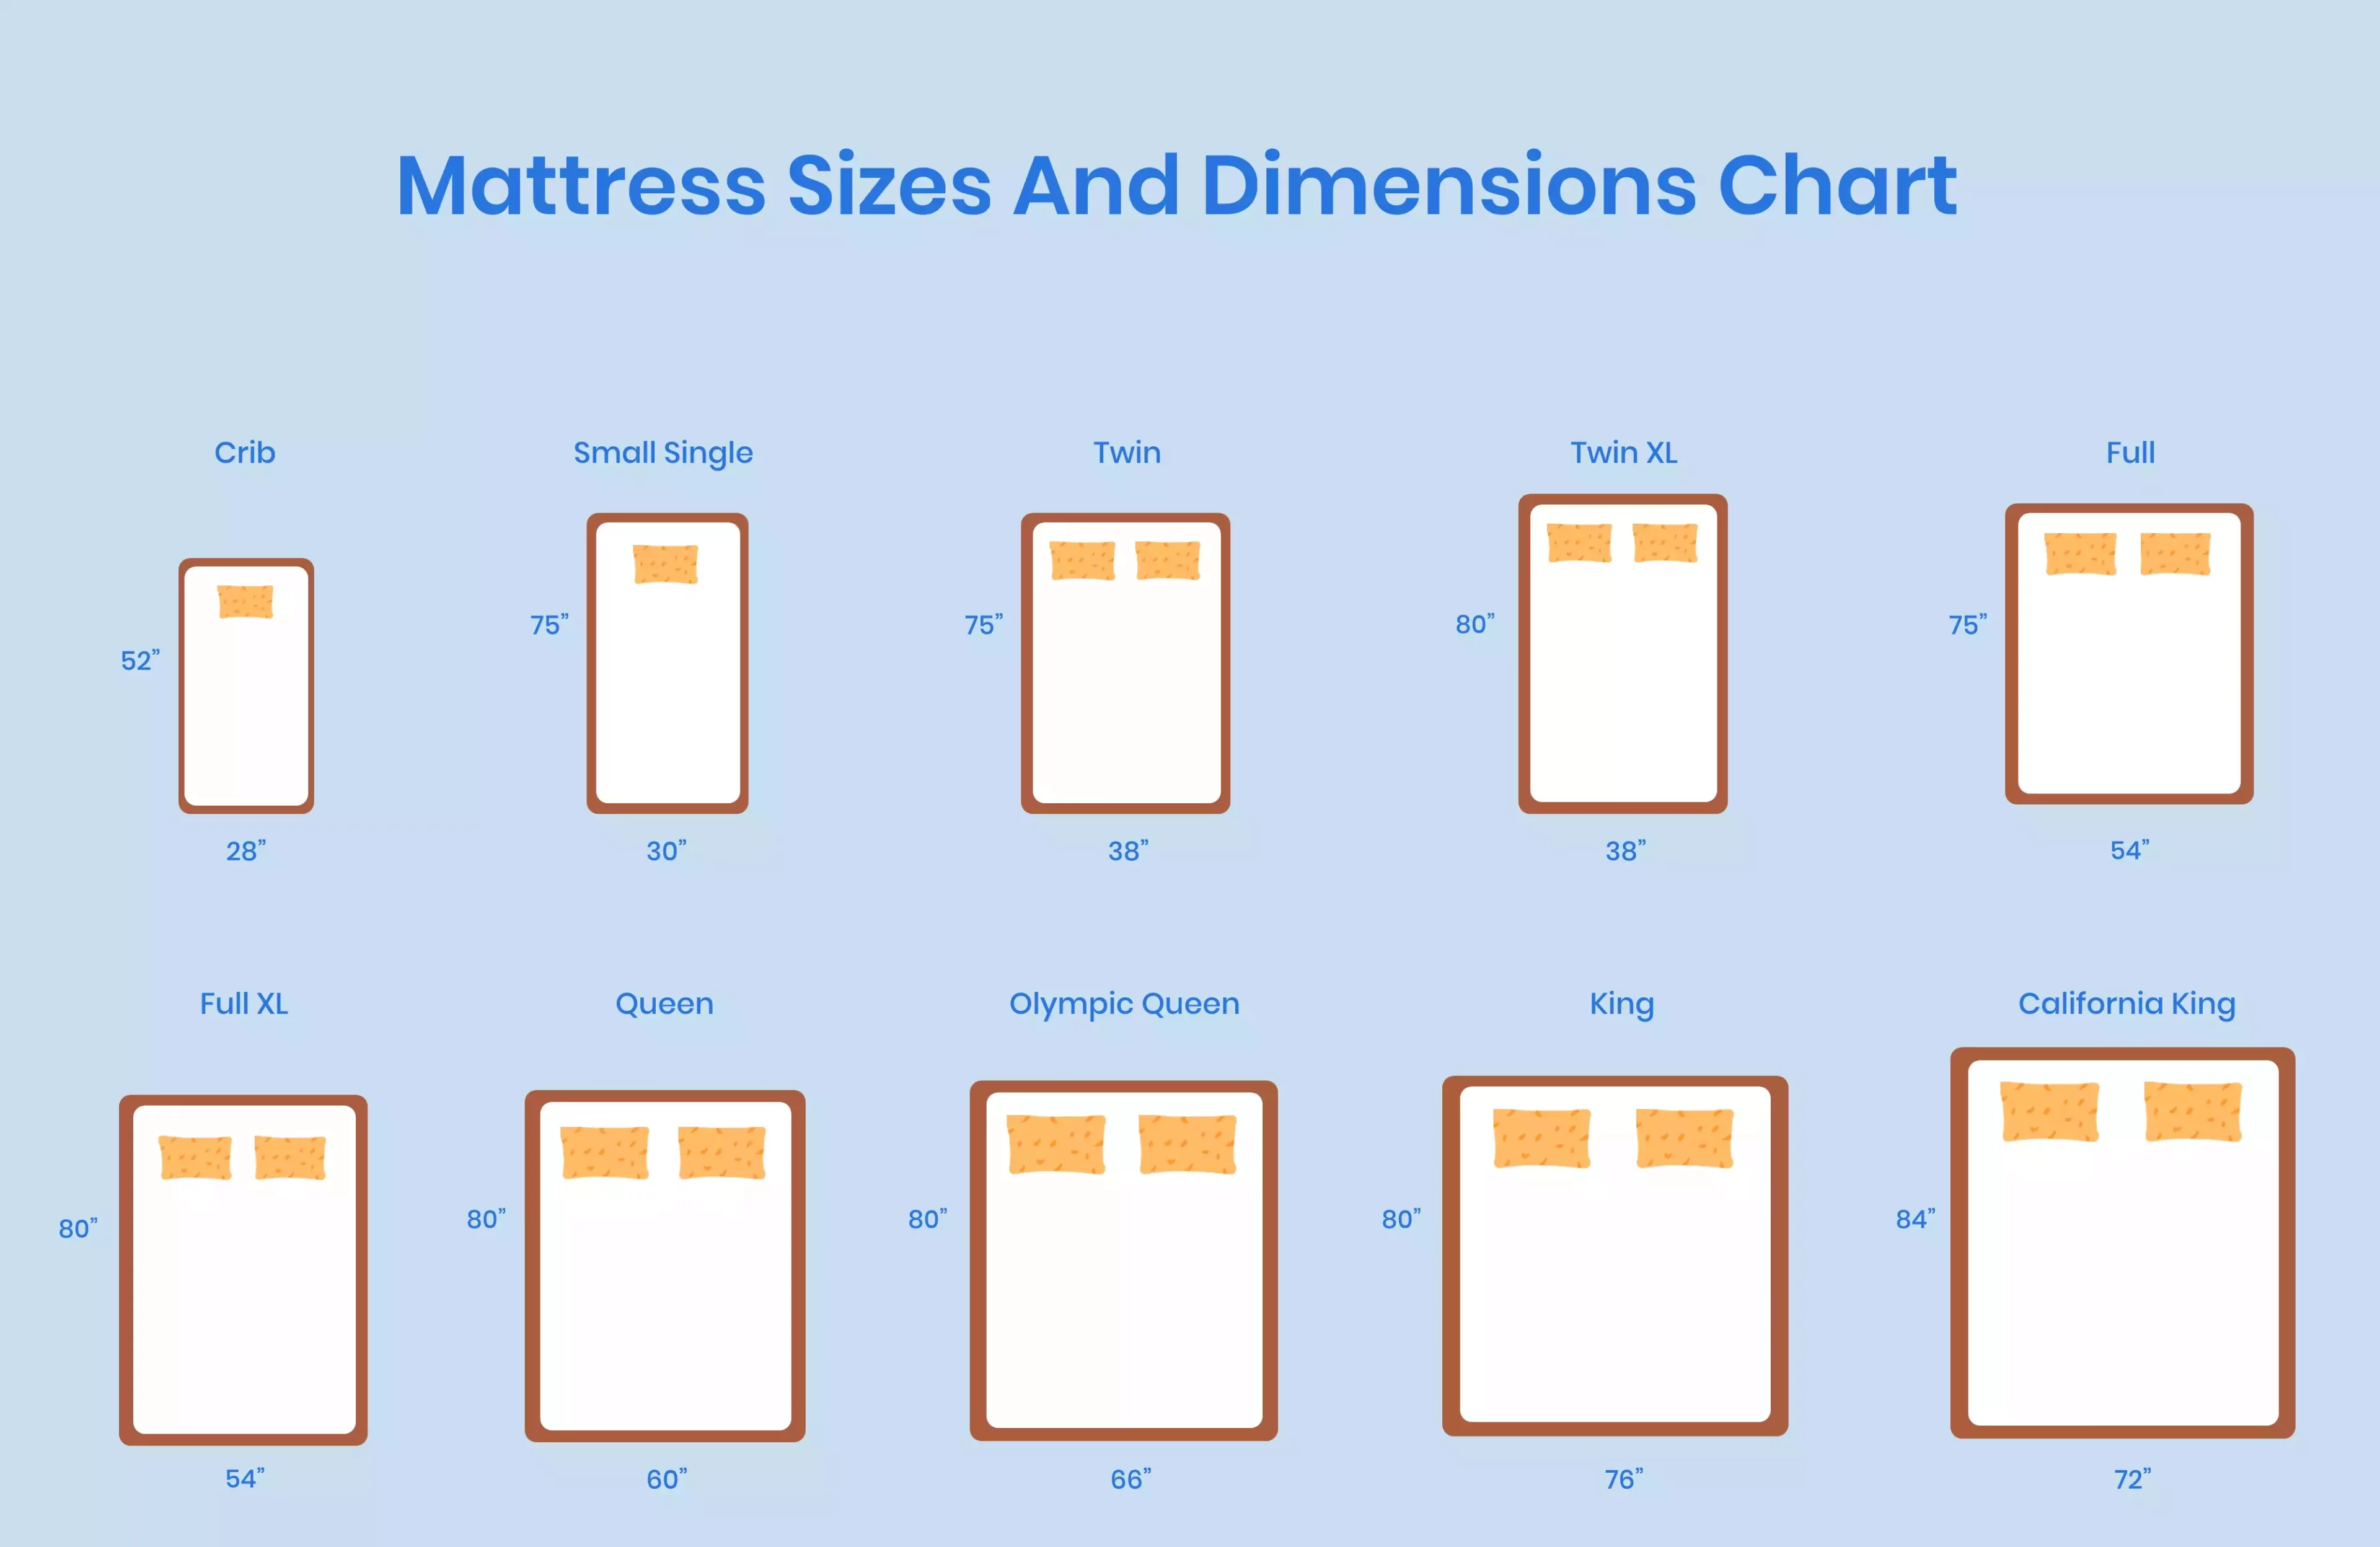 What Are The Dimensions Of A Nectar Mattress Box?